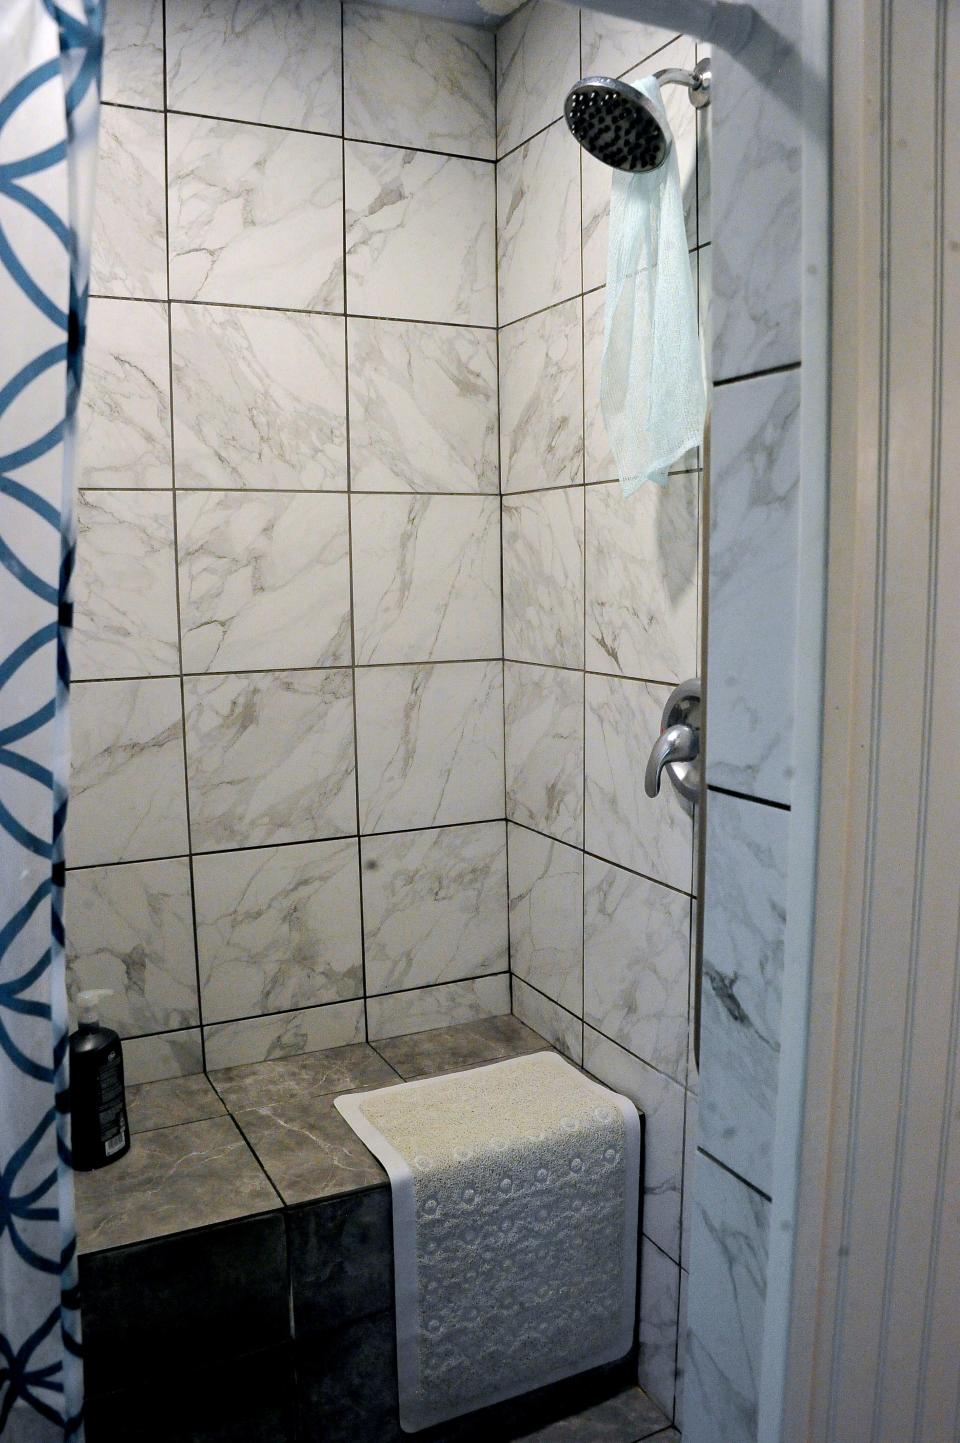 A new, specially-designed shower stall was among the home renovations funded by community donations.